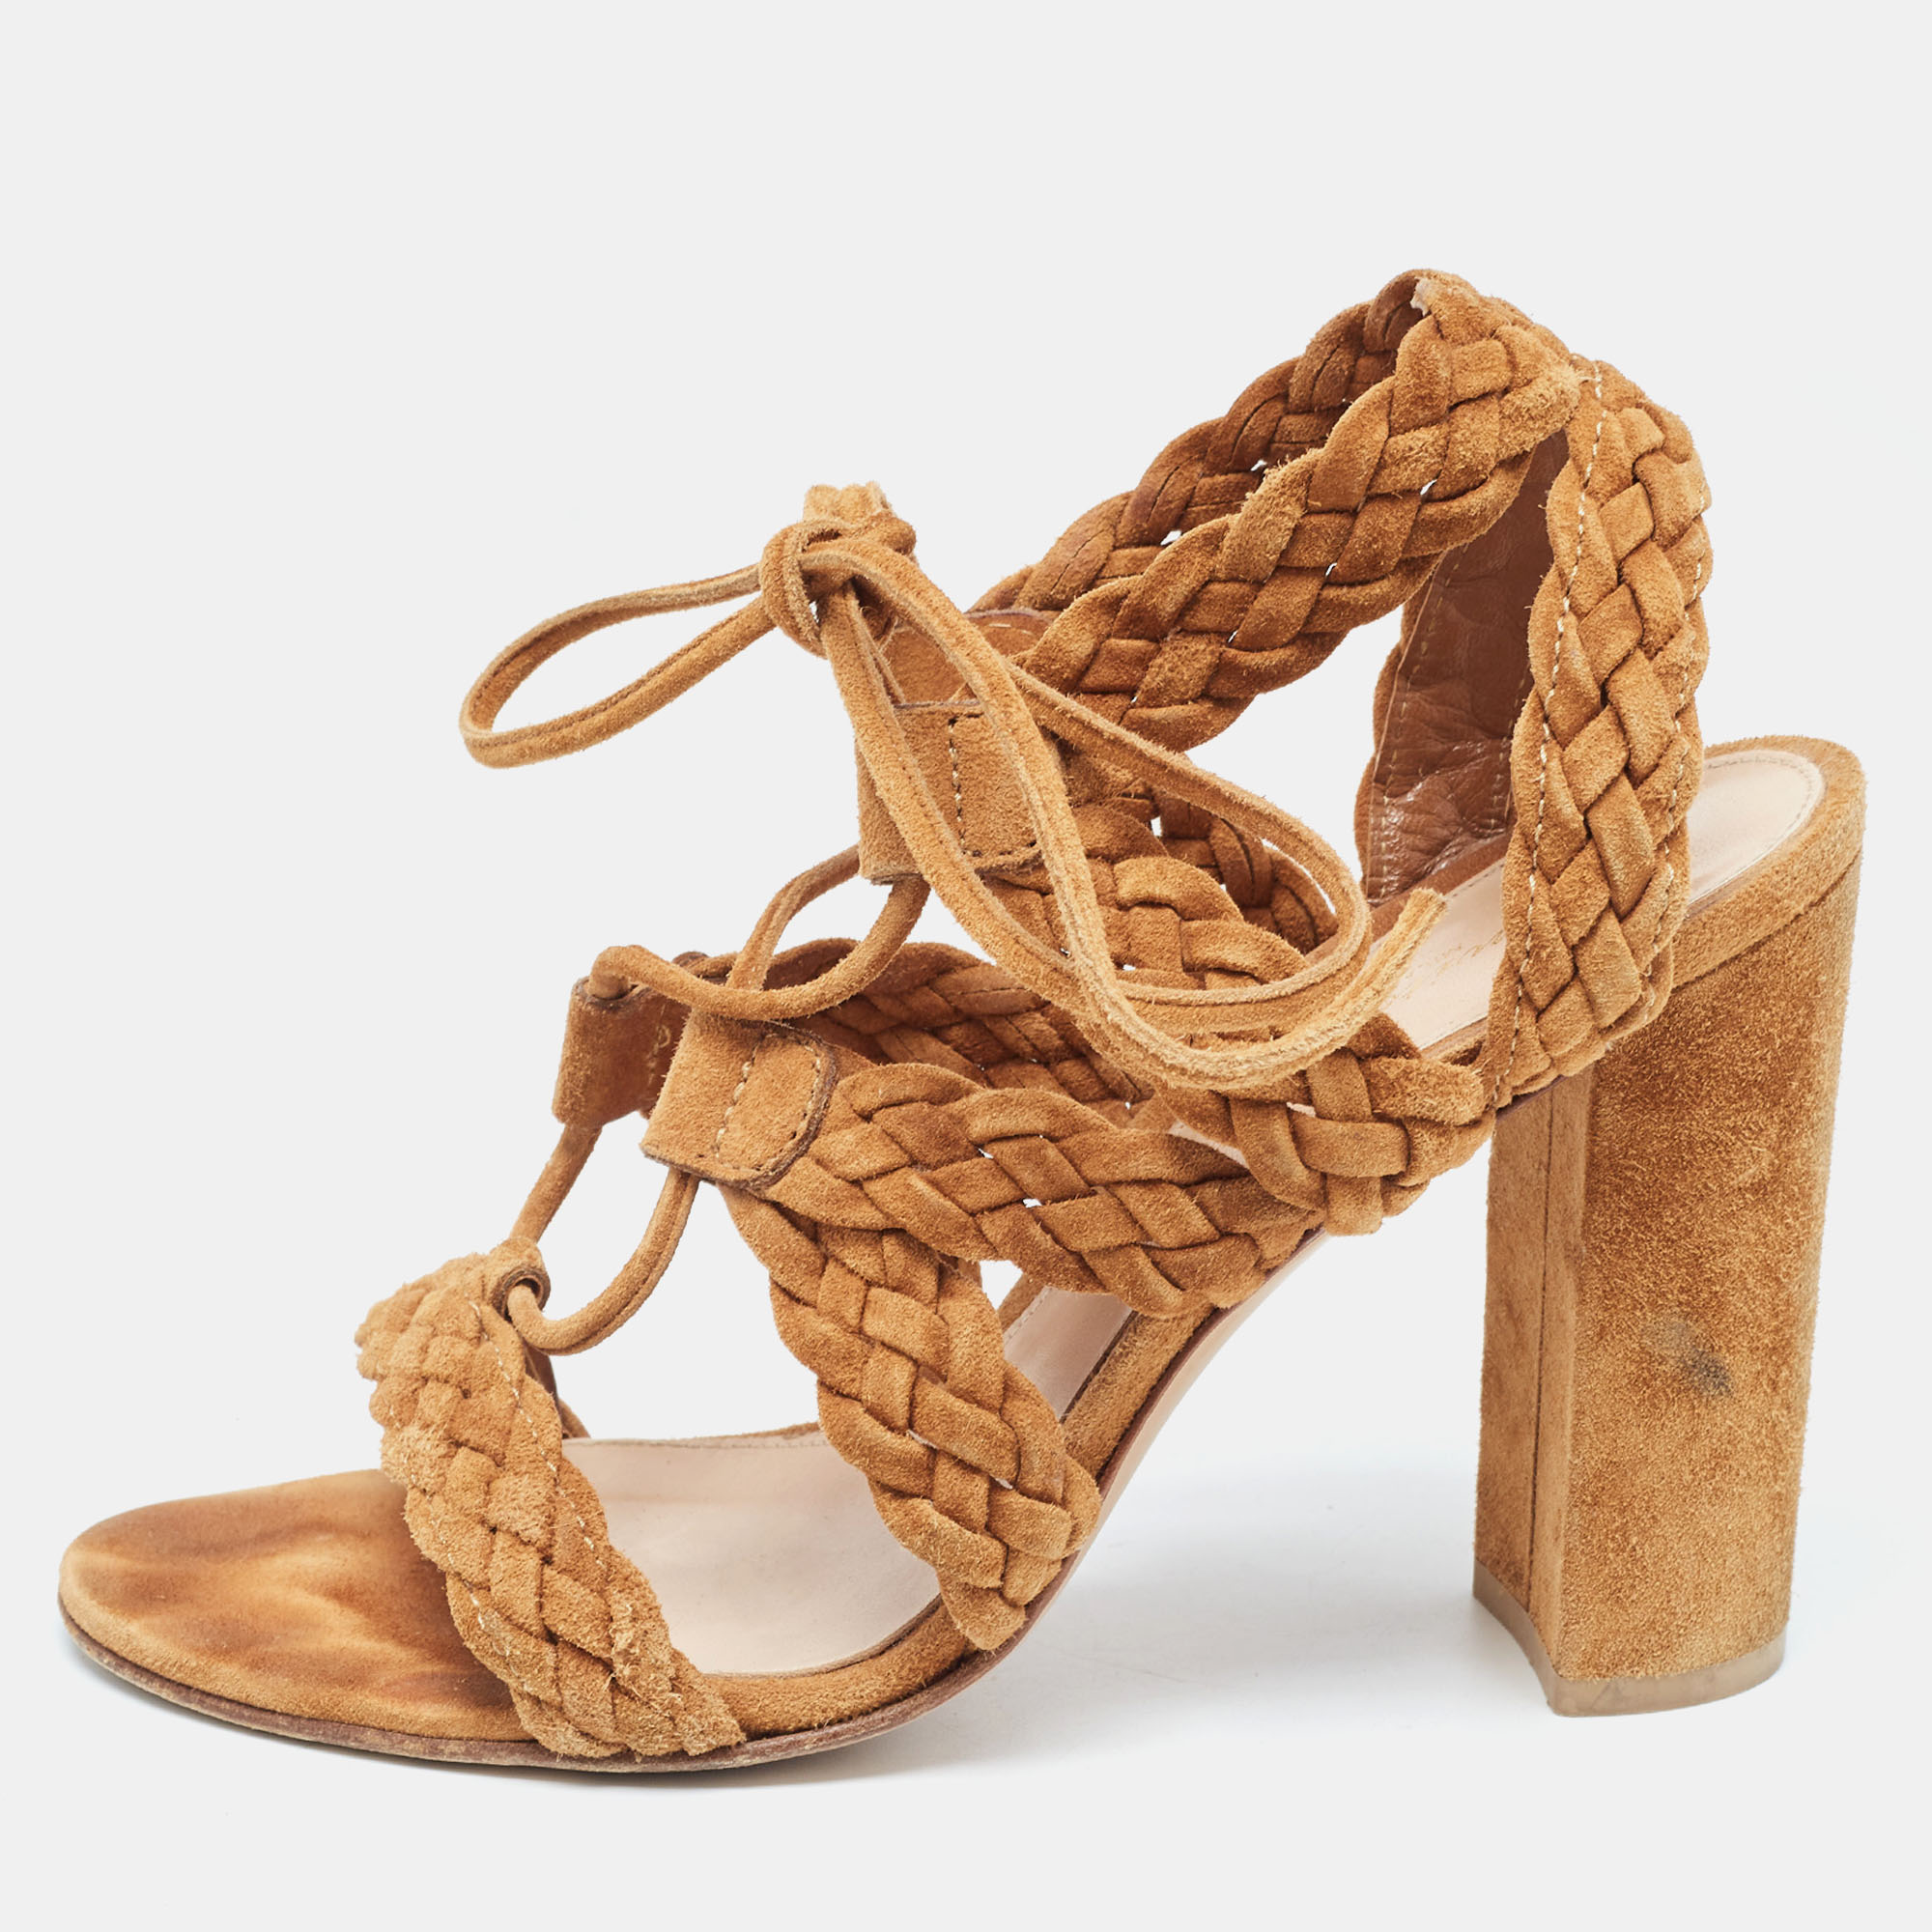 Gianvito Rossi Brown Suede Strappy Sandals Size 37.5